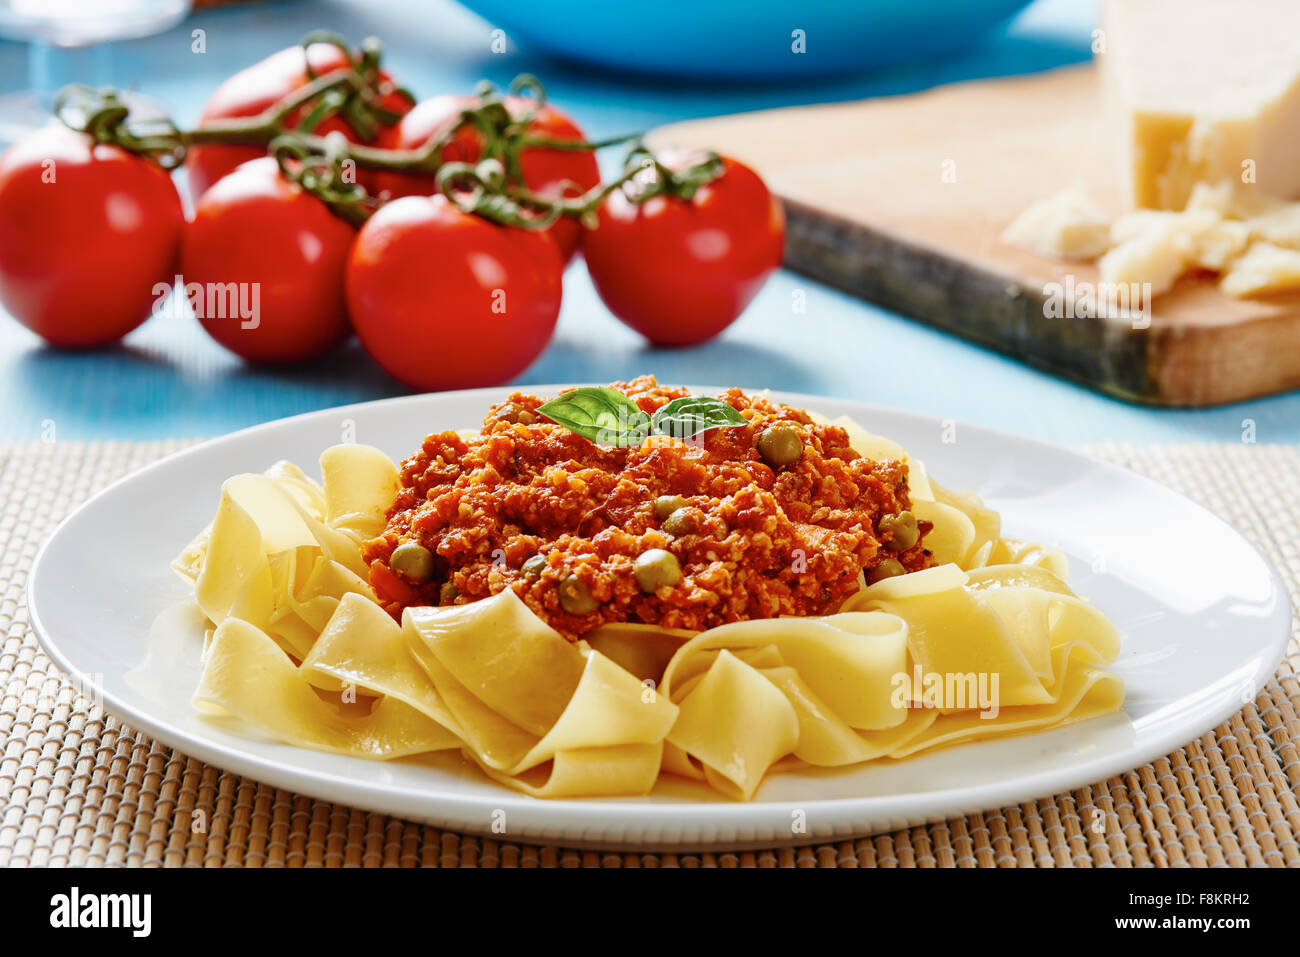 Tagliatelle with Bolognese sauce on white plate and blue wooden table Stock Photo